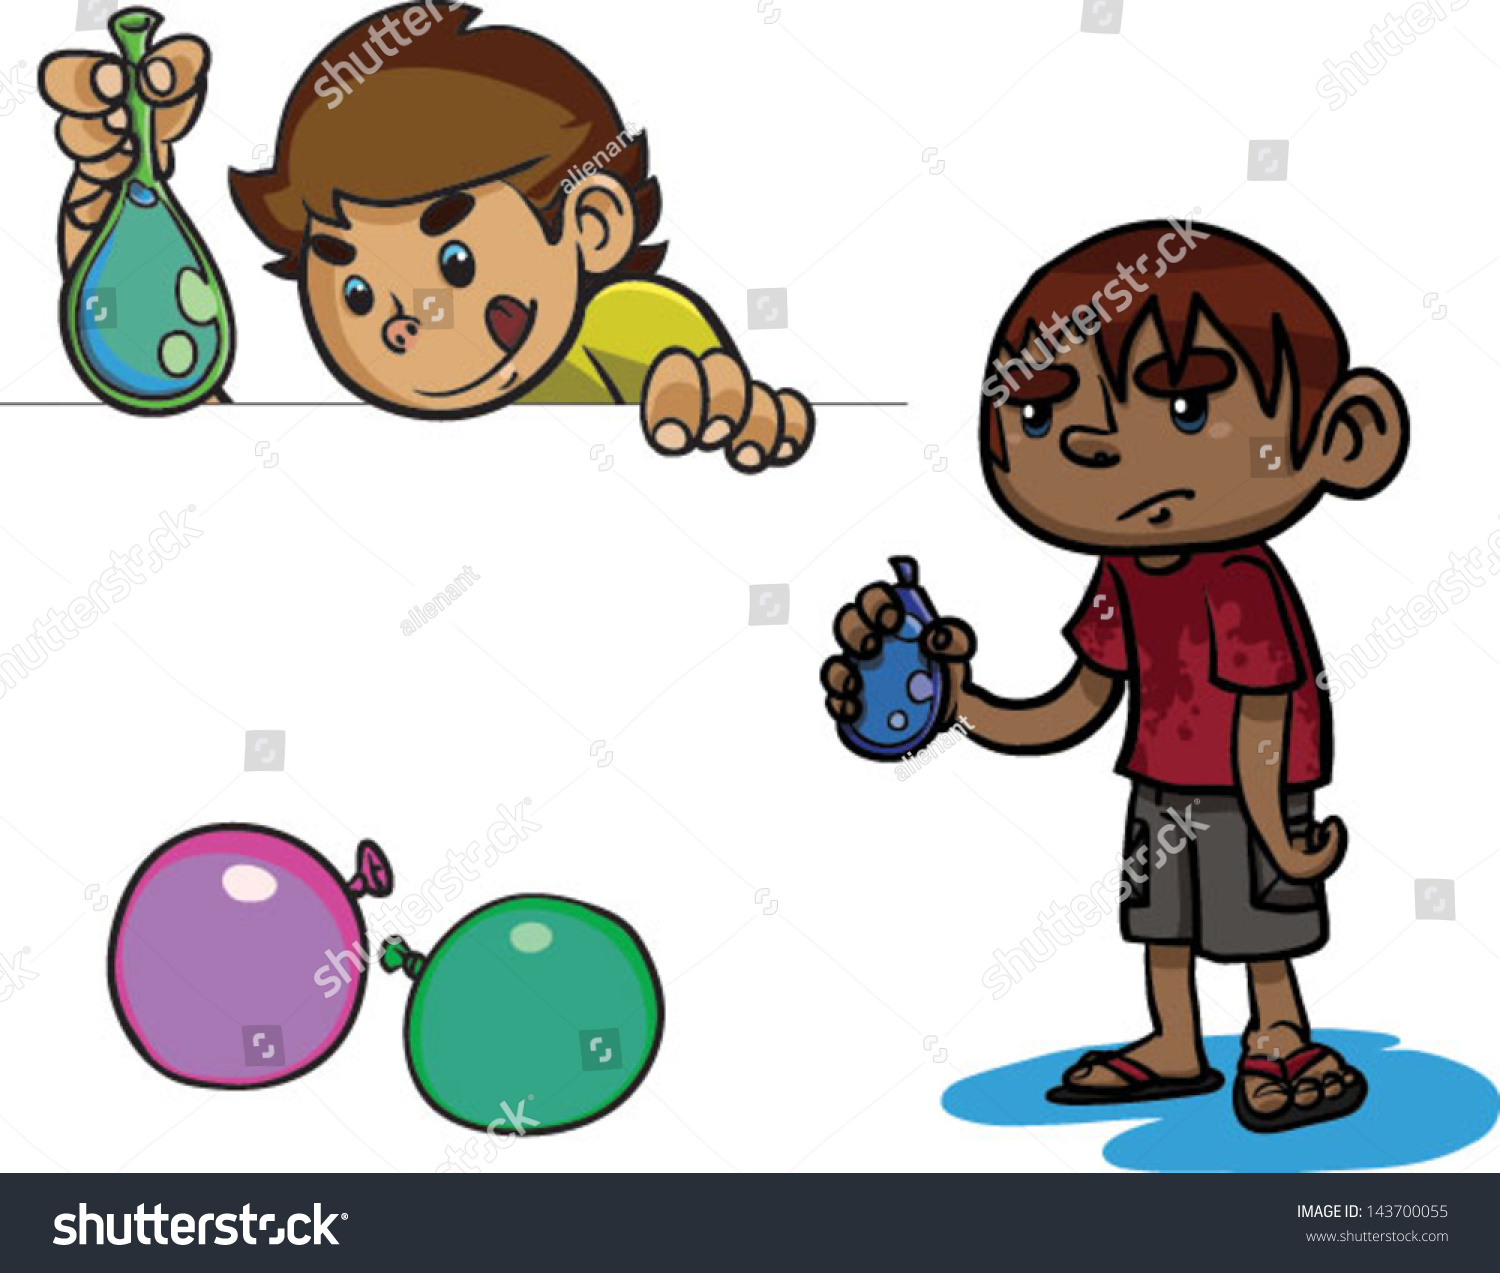 clipart water play - photo #40